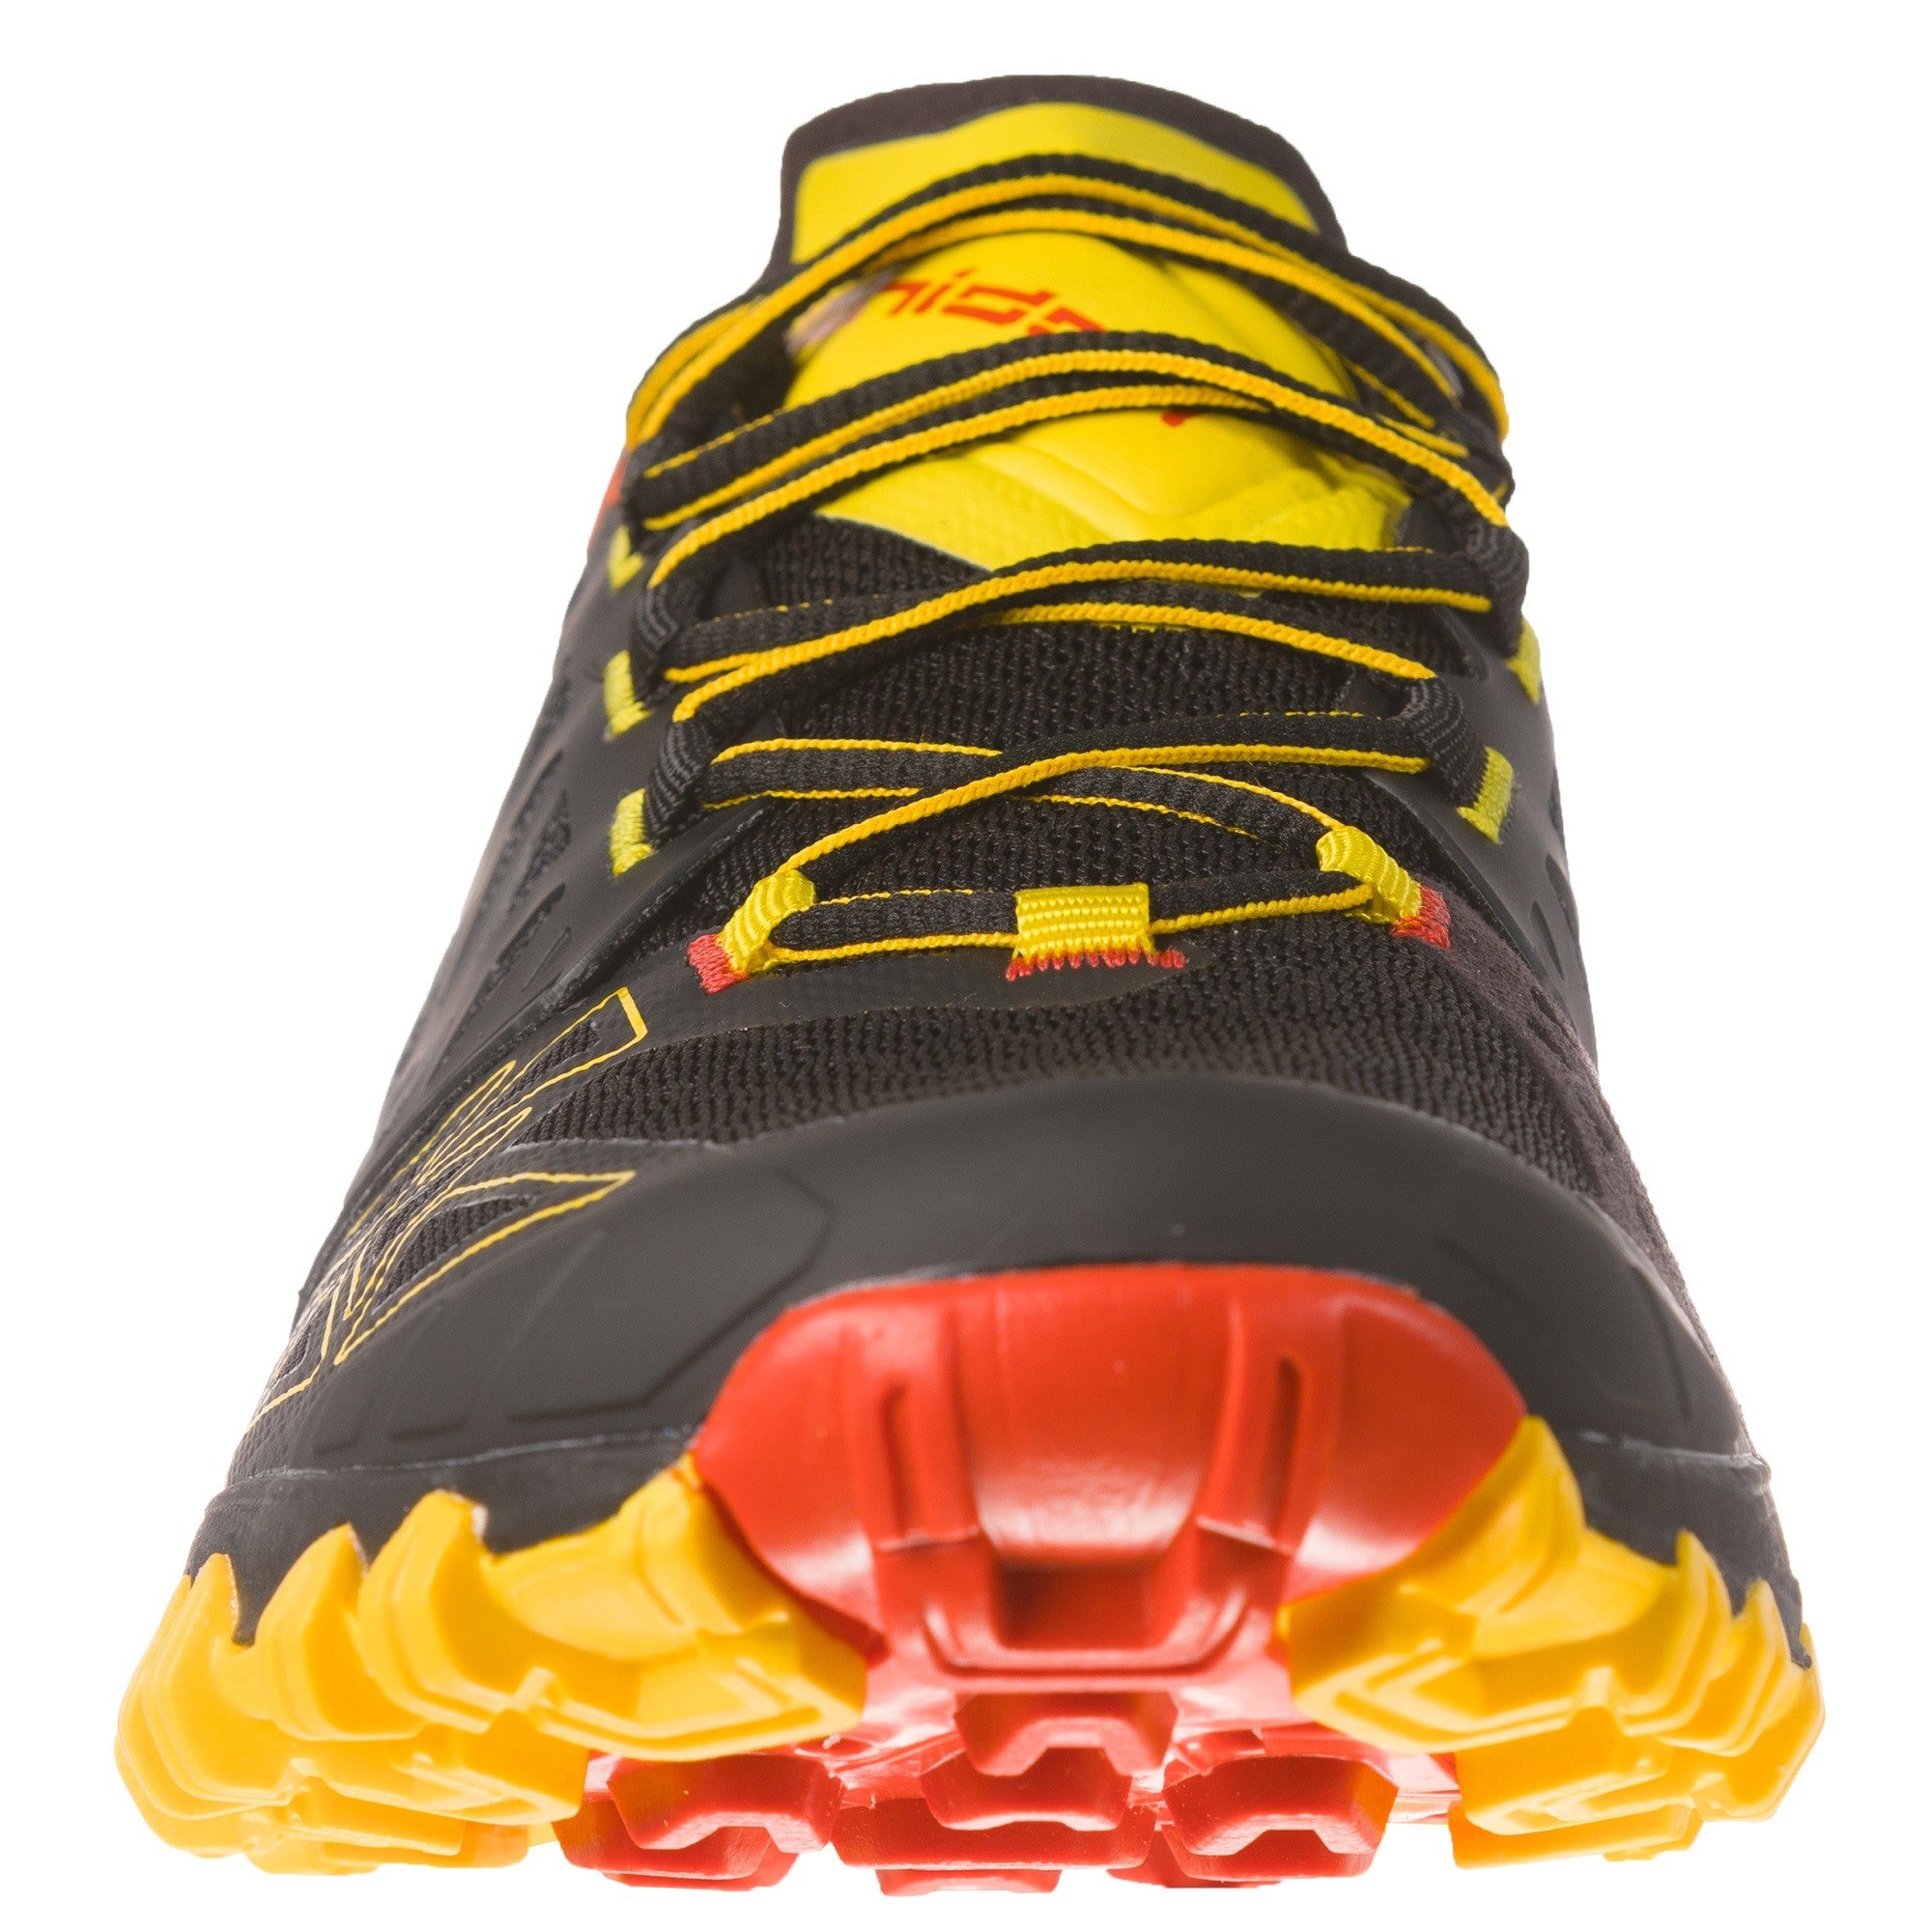 La Sportiva Bushido II trail running shoe, outer side view in Black/Yellow/red colours